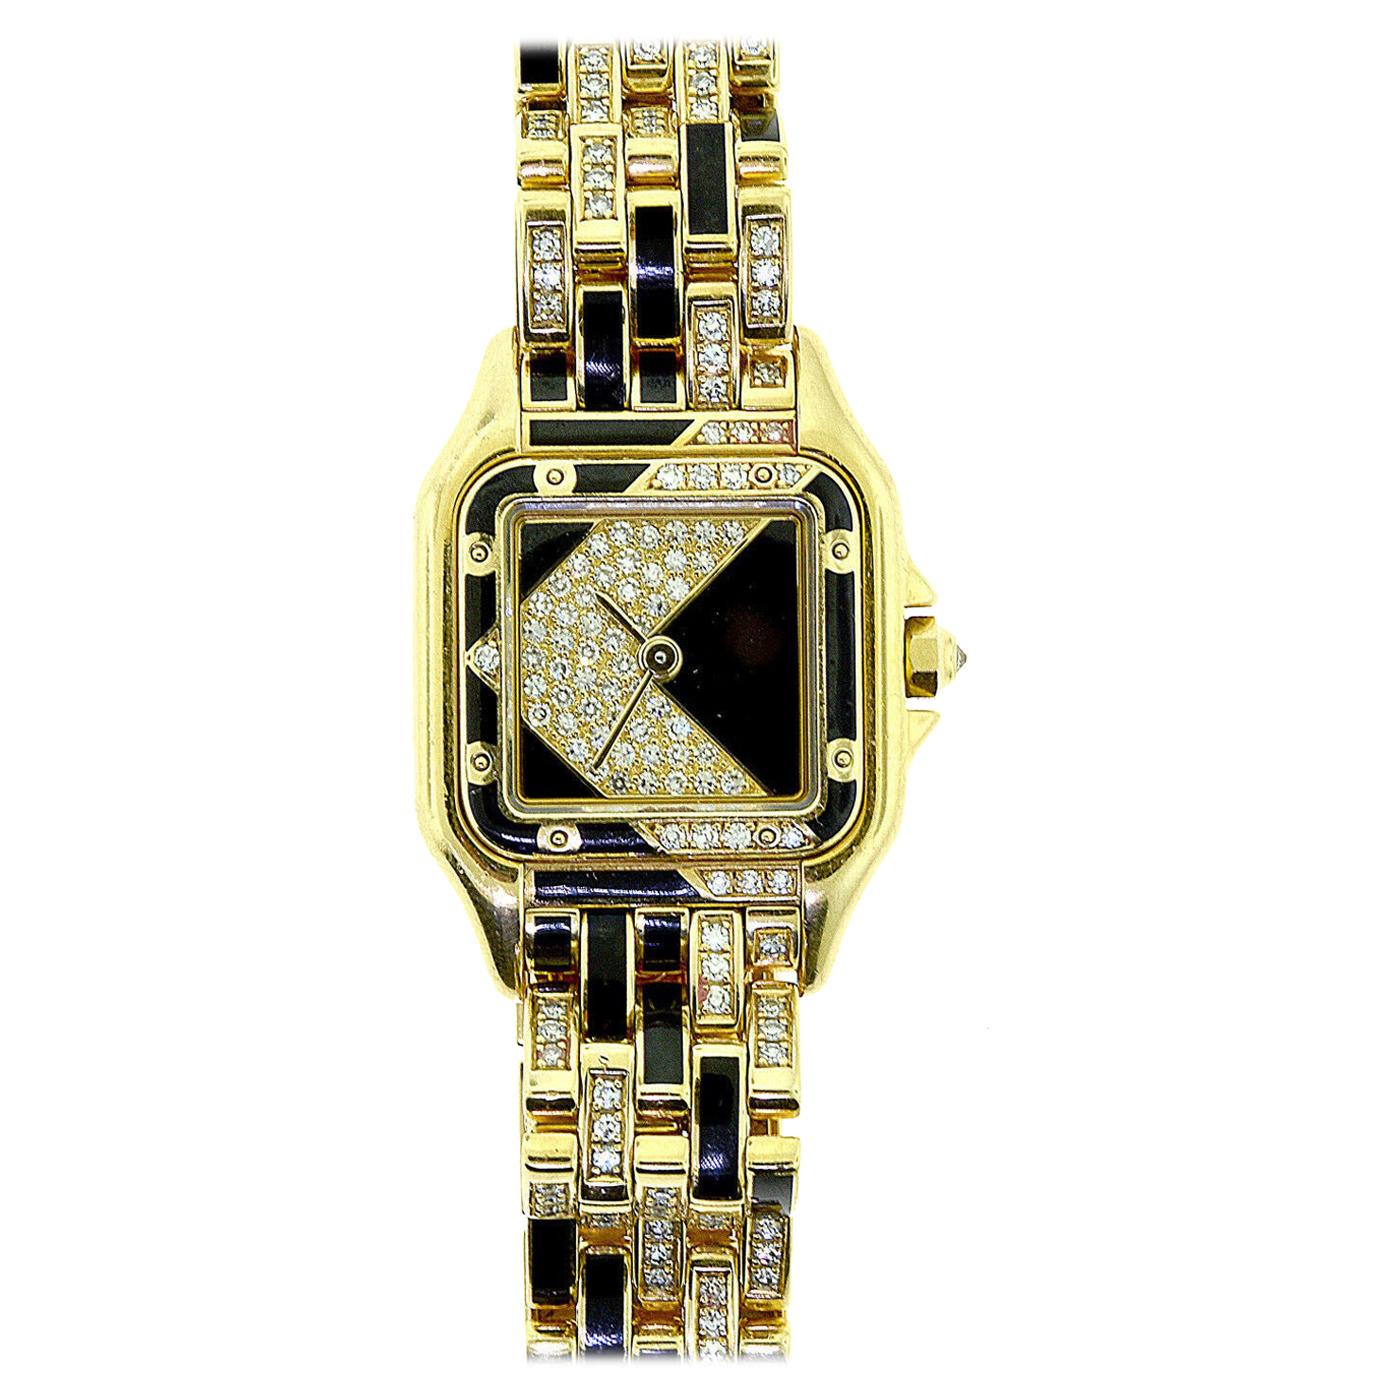 Cartier Panthere de Cartier Reference 12802 Diamond Onyx Watch in Yellow Gold